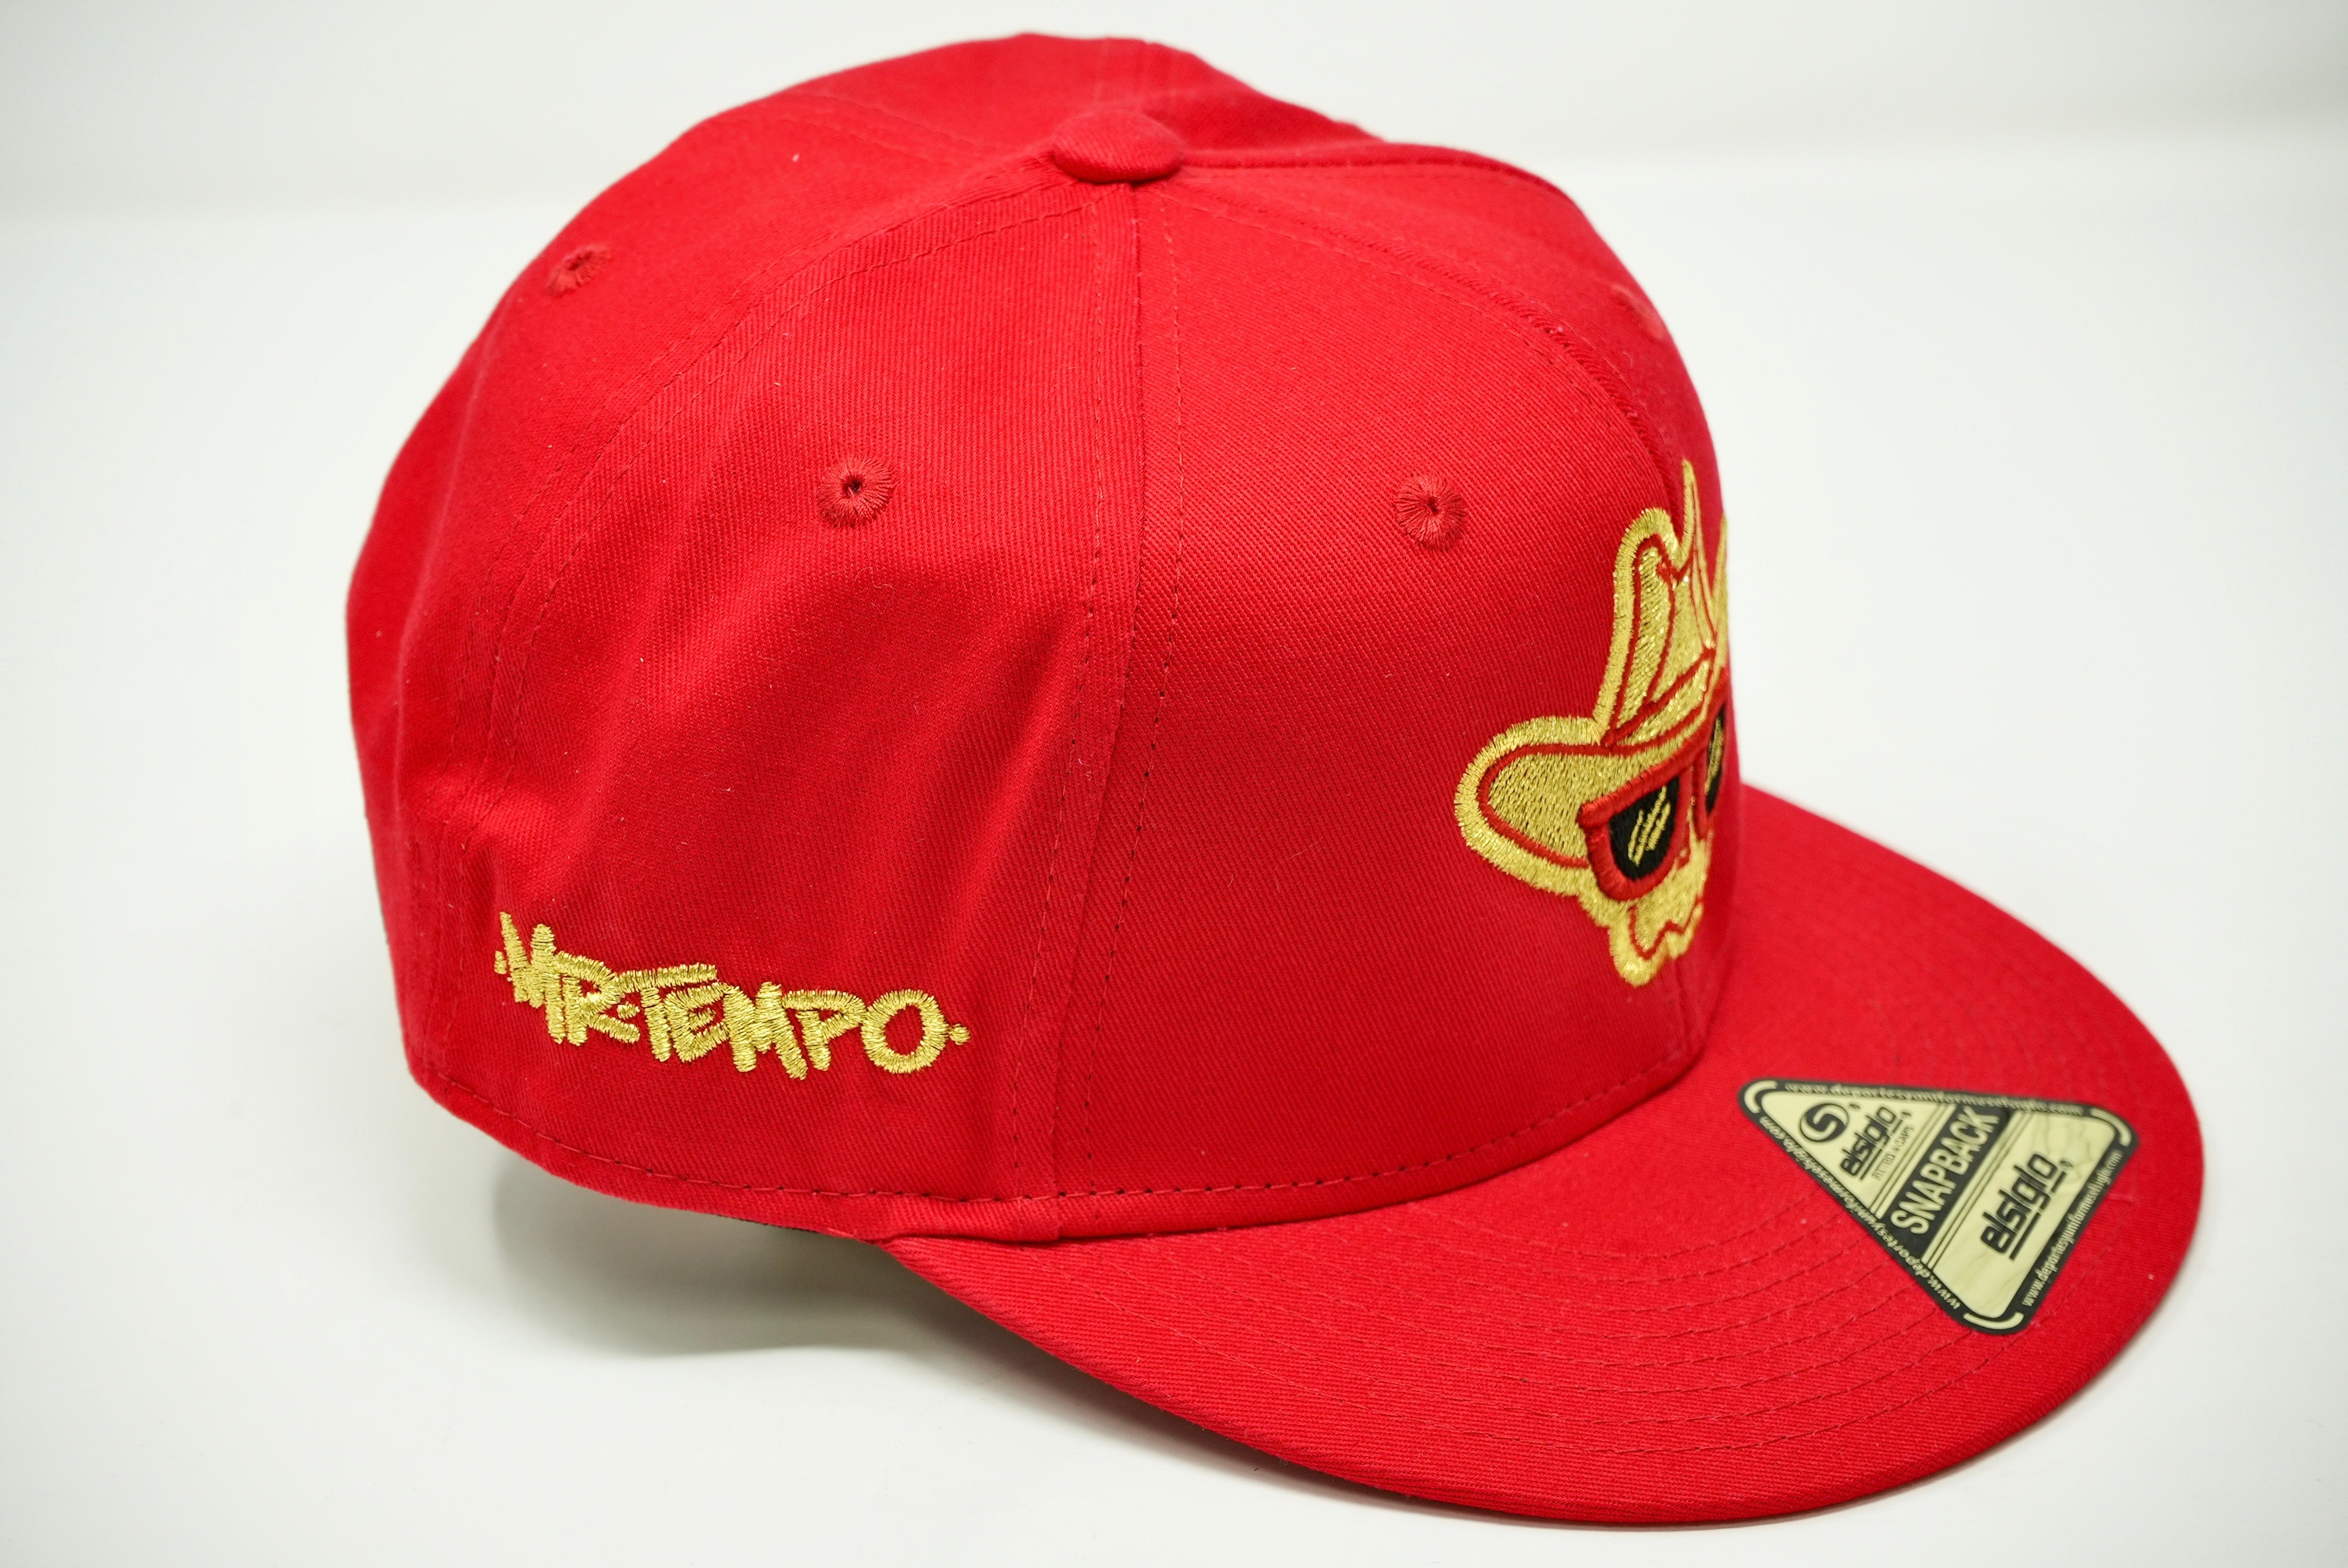 Mr.Tempo Red Hat